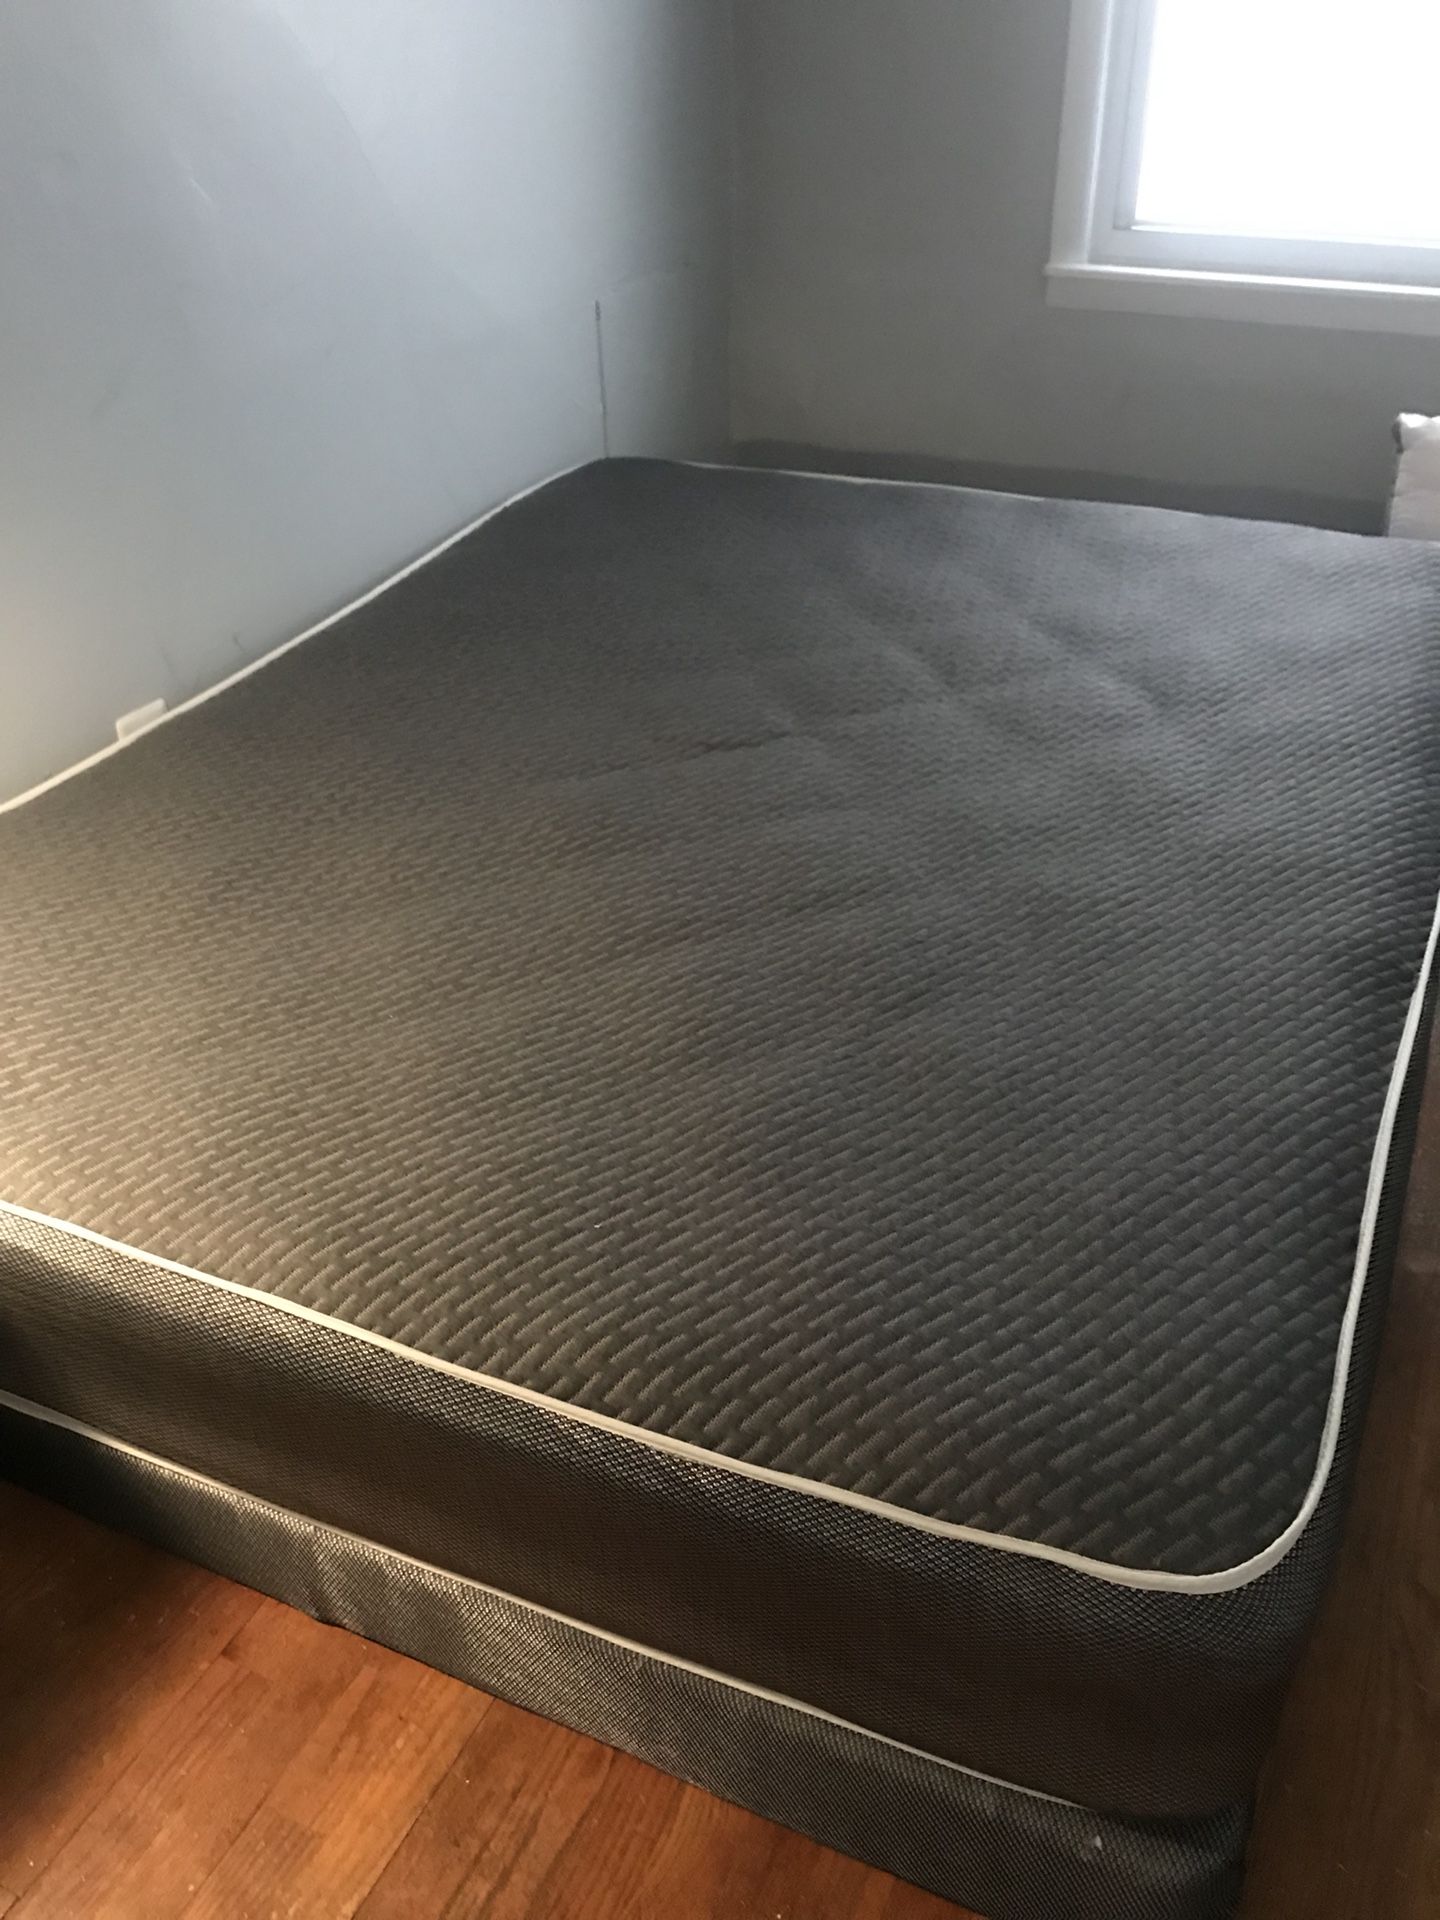 Brand New Queen Mattress and Box Spring